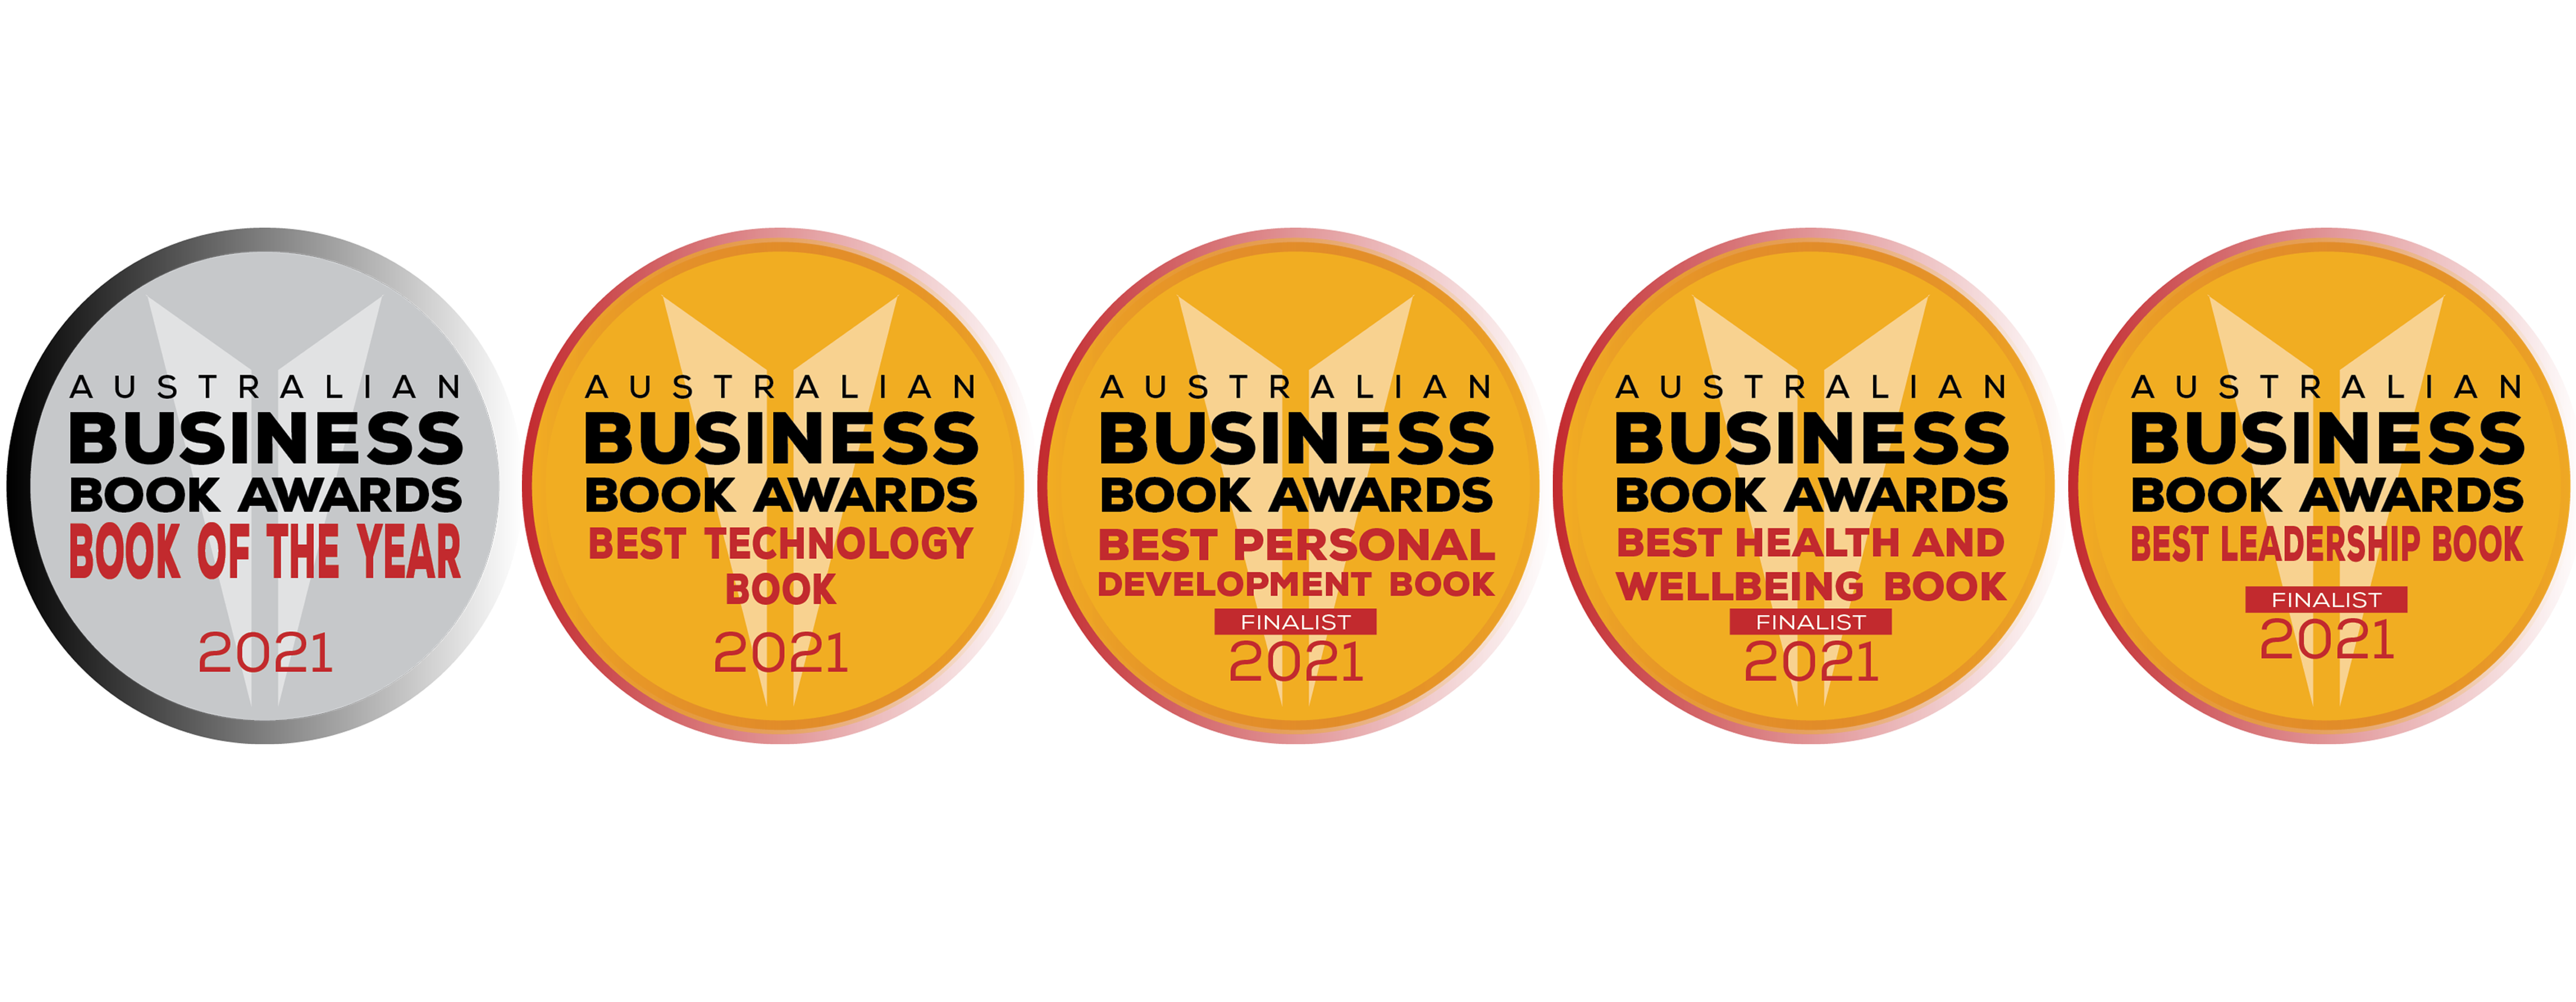 PC book wins Business Book of the Year!